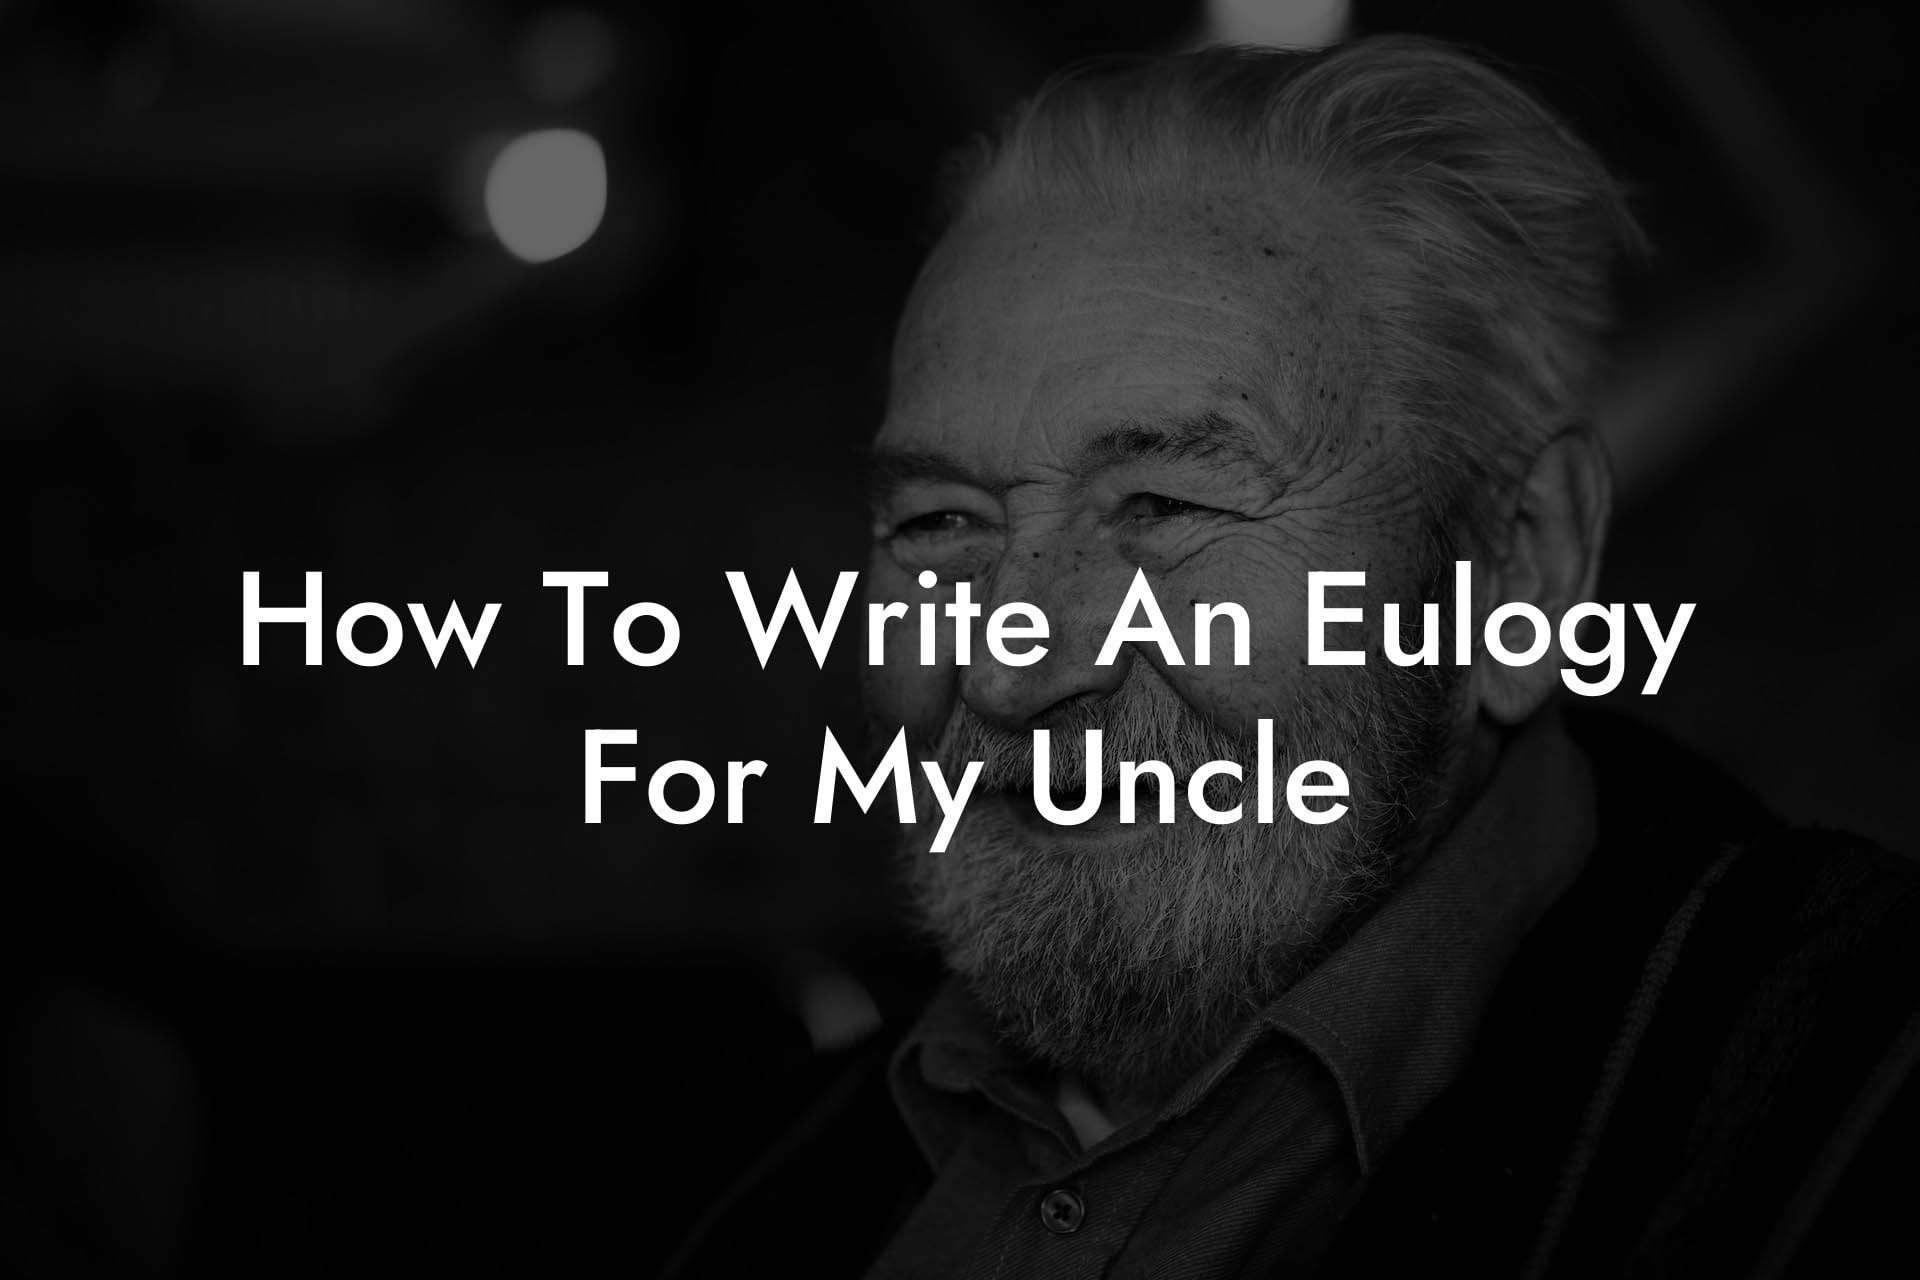 How To Write An Eulogy For My Uncle